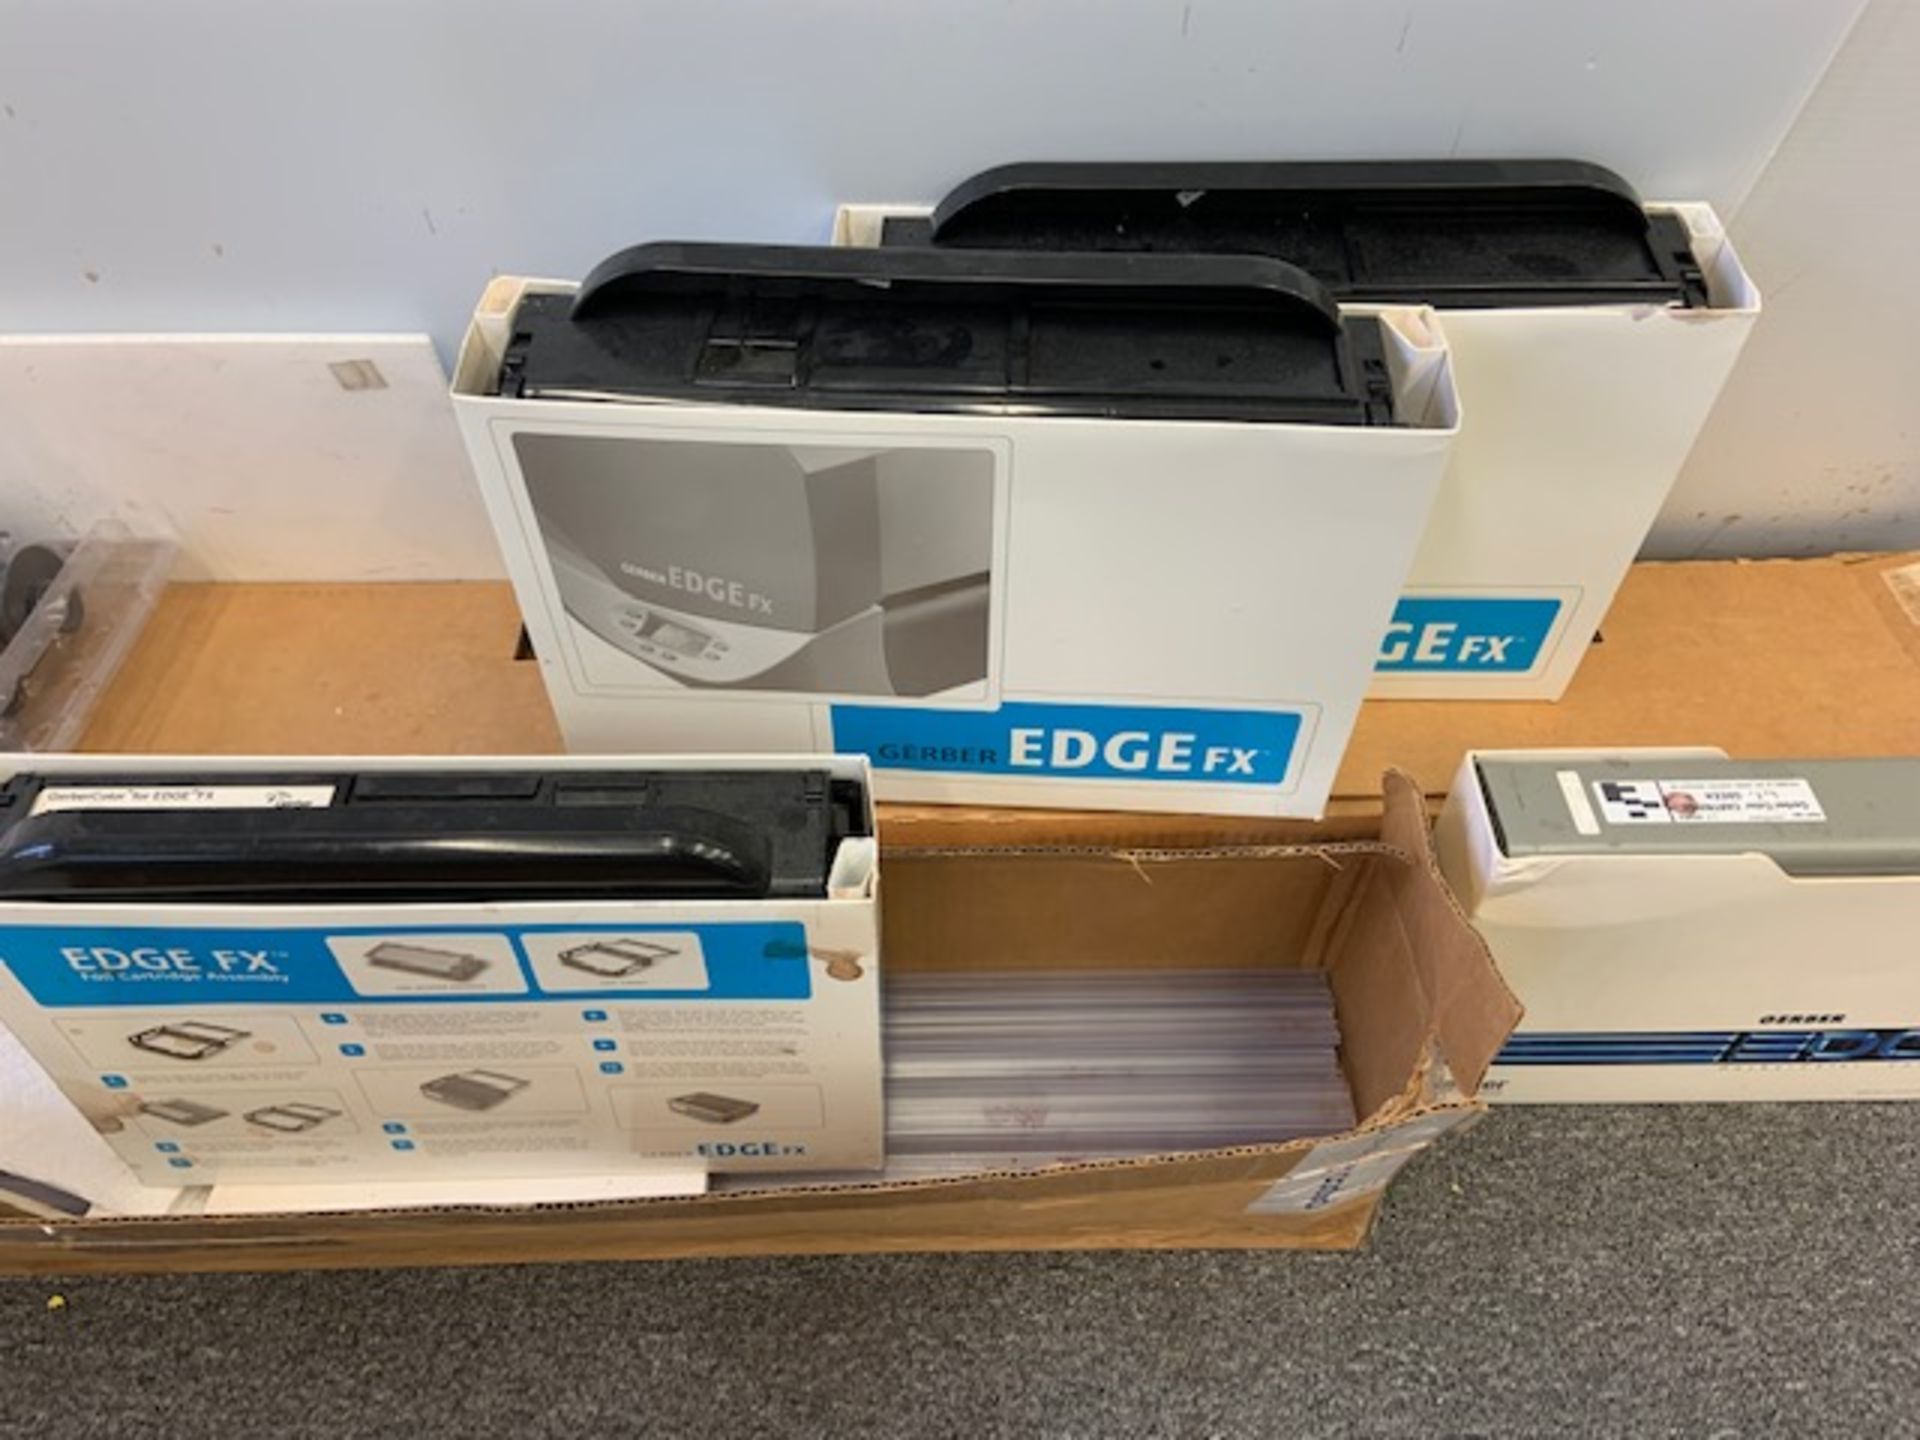 Gerber Edge FX Thermal Printer with Supplies - Image 4 of 8